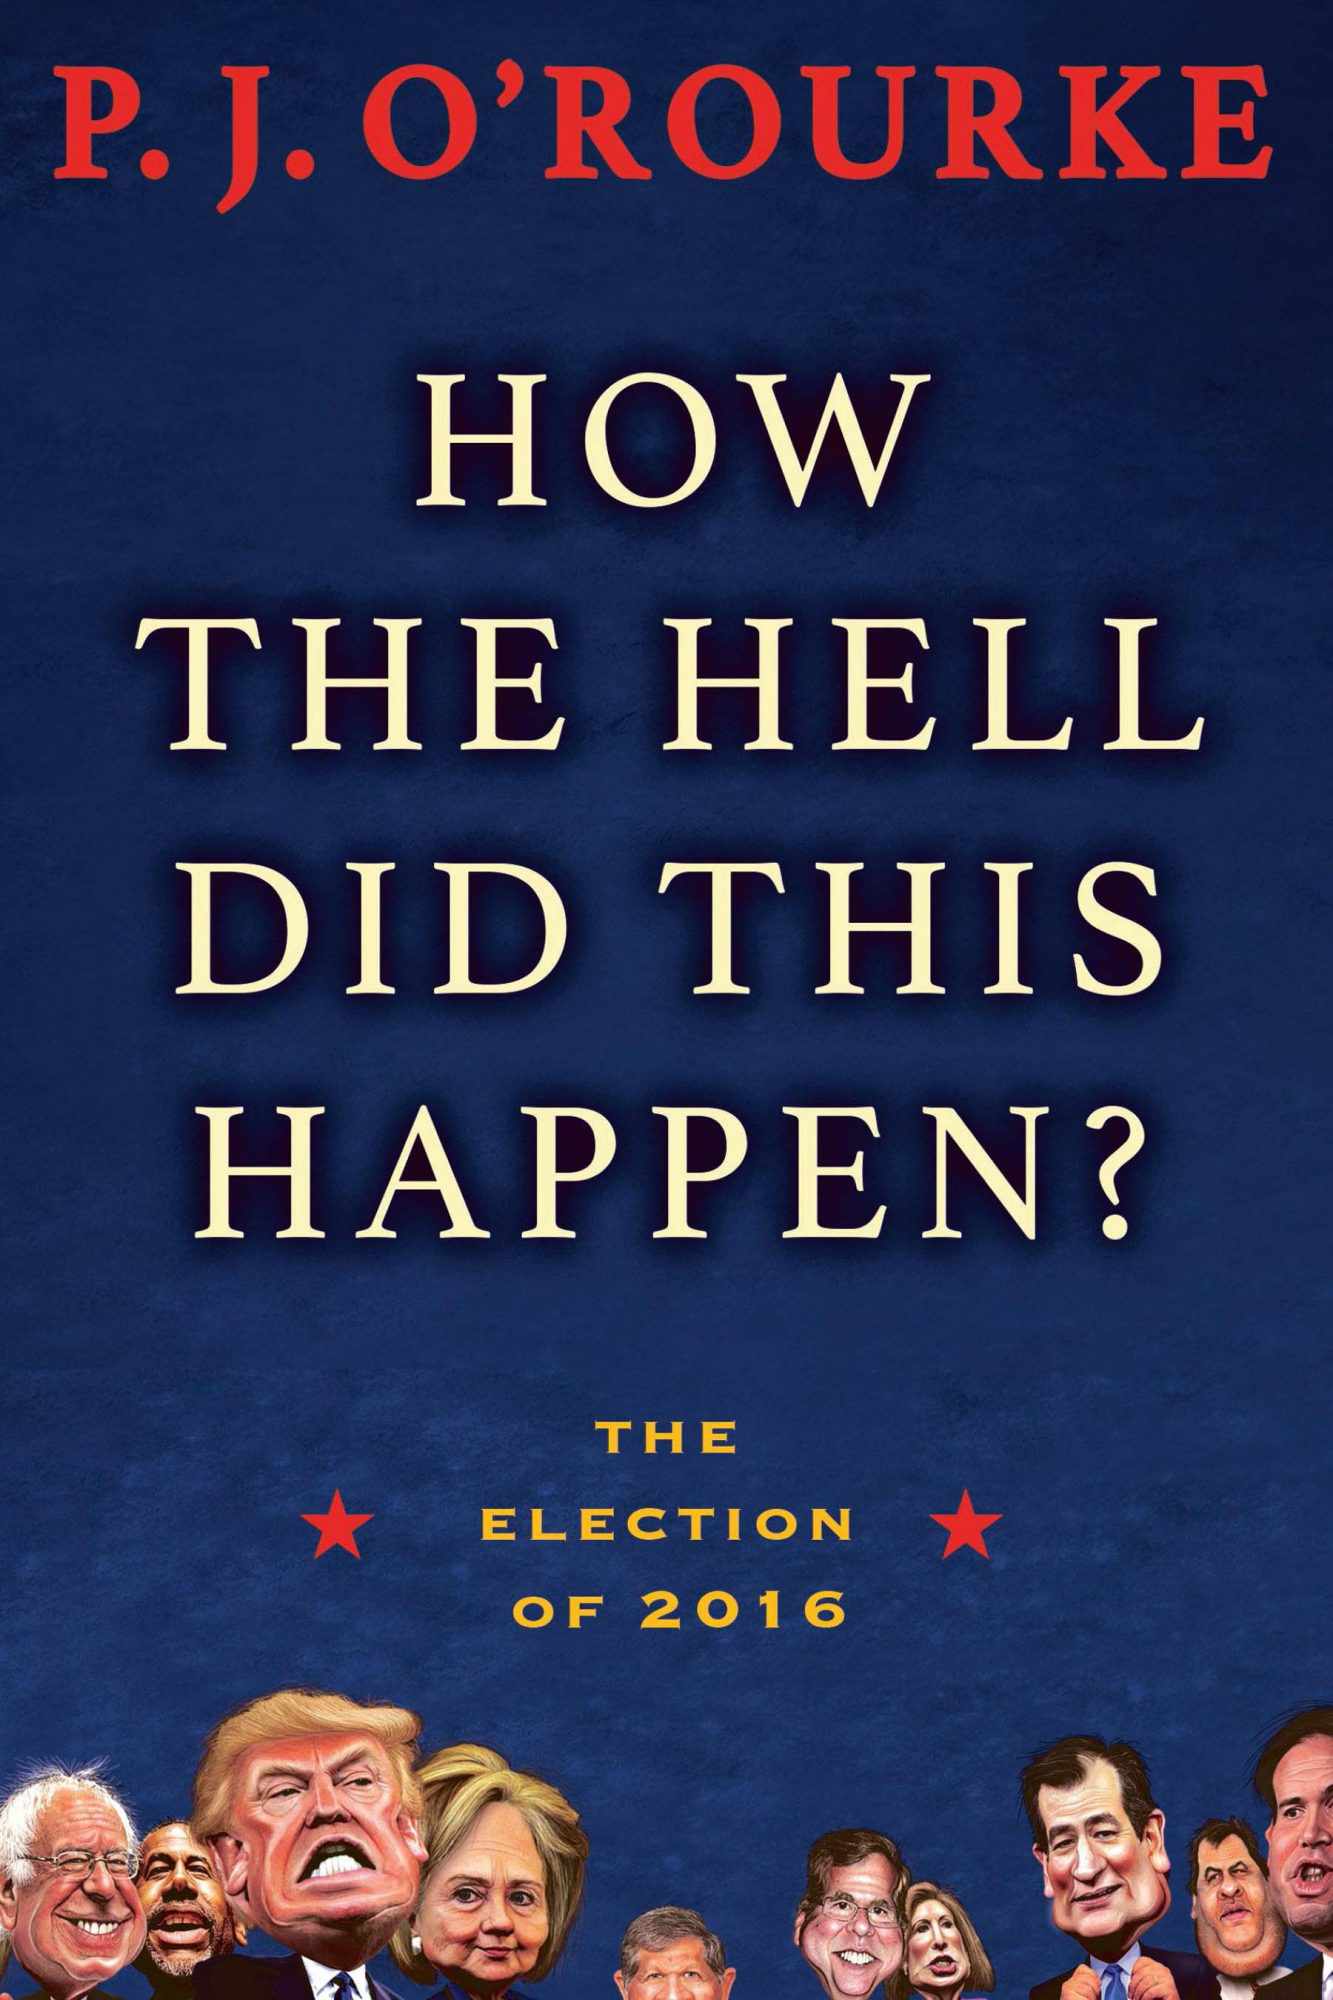 For the most pessimistic:&nbsp;How the Hell Did This Happen?&nbsp;by P.J. O'Rourke